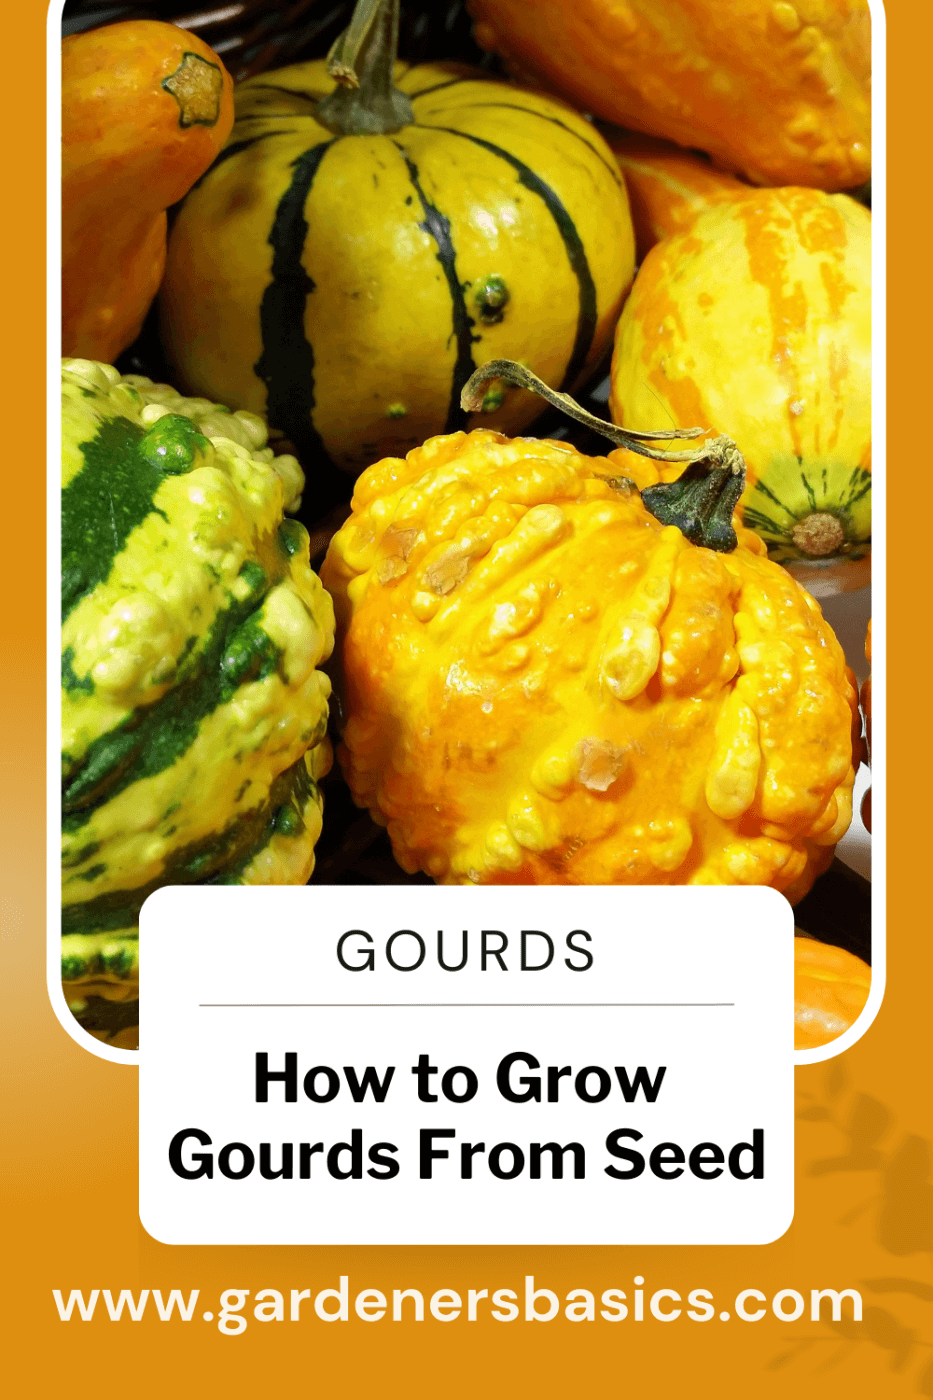 How to Grow Gourd From Seed